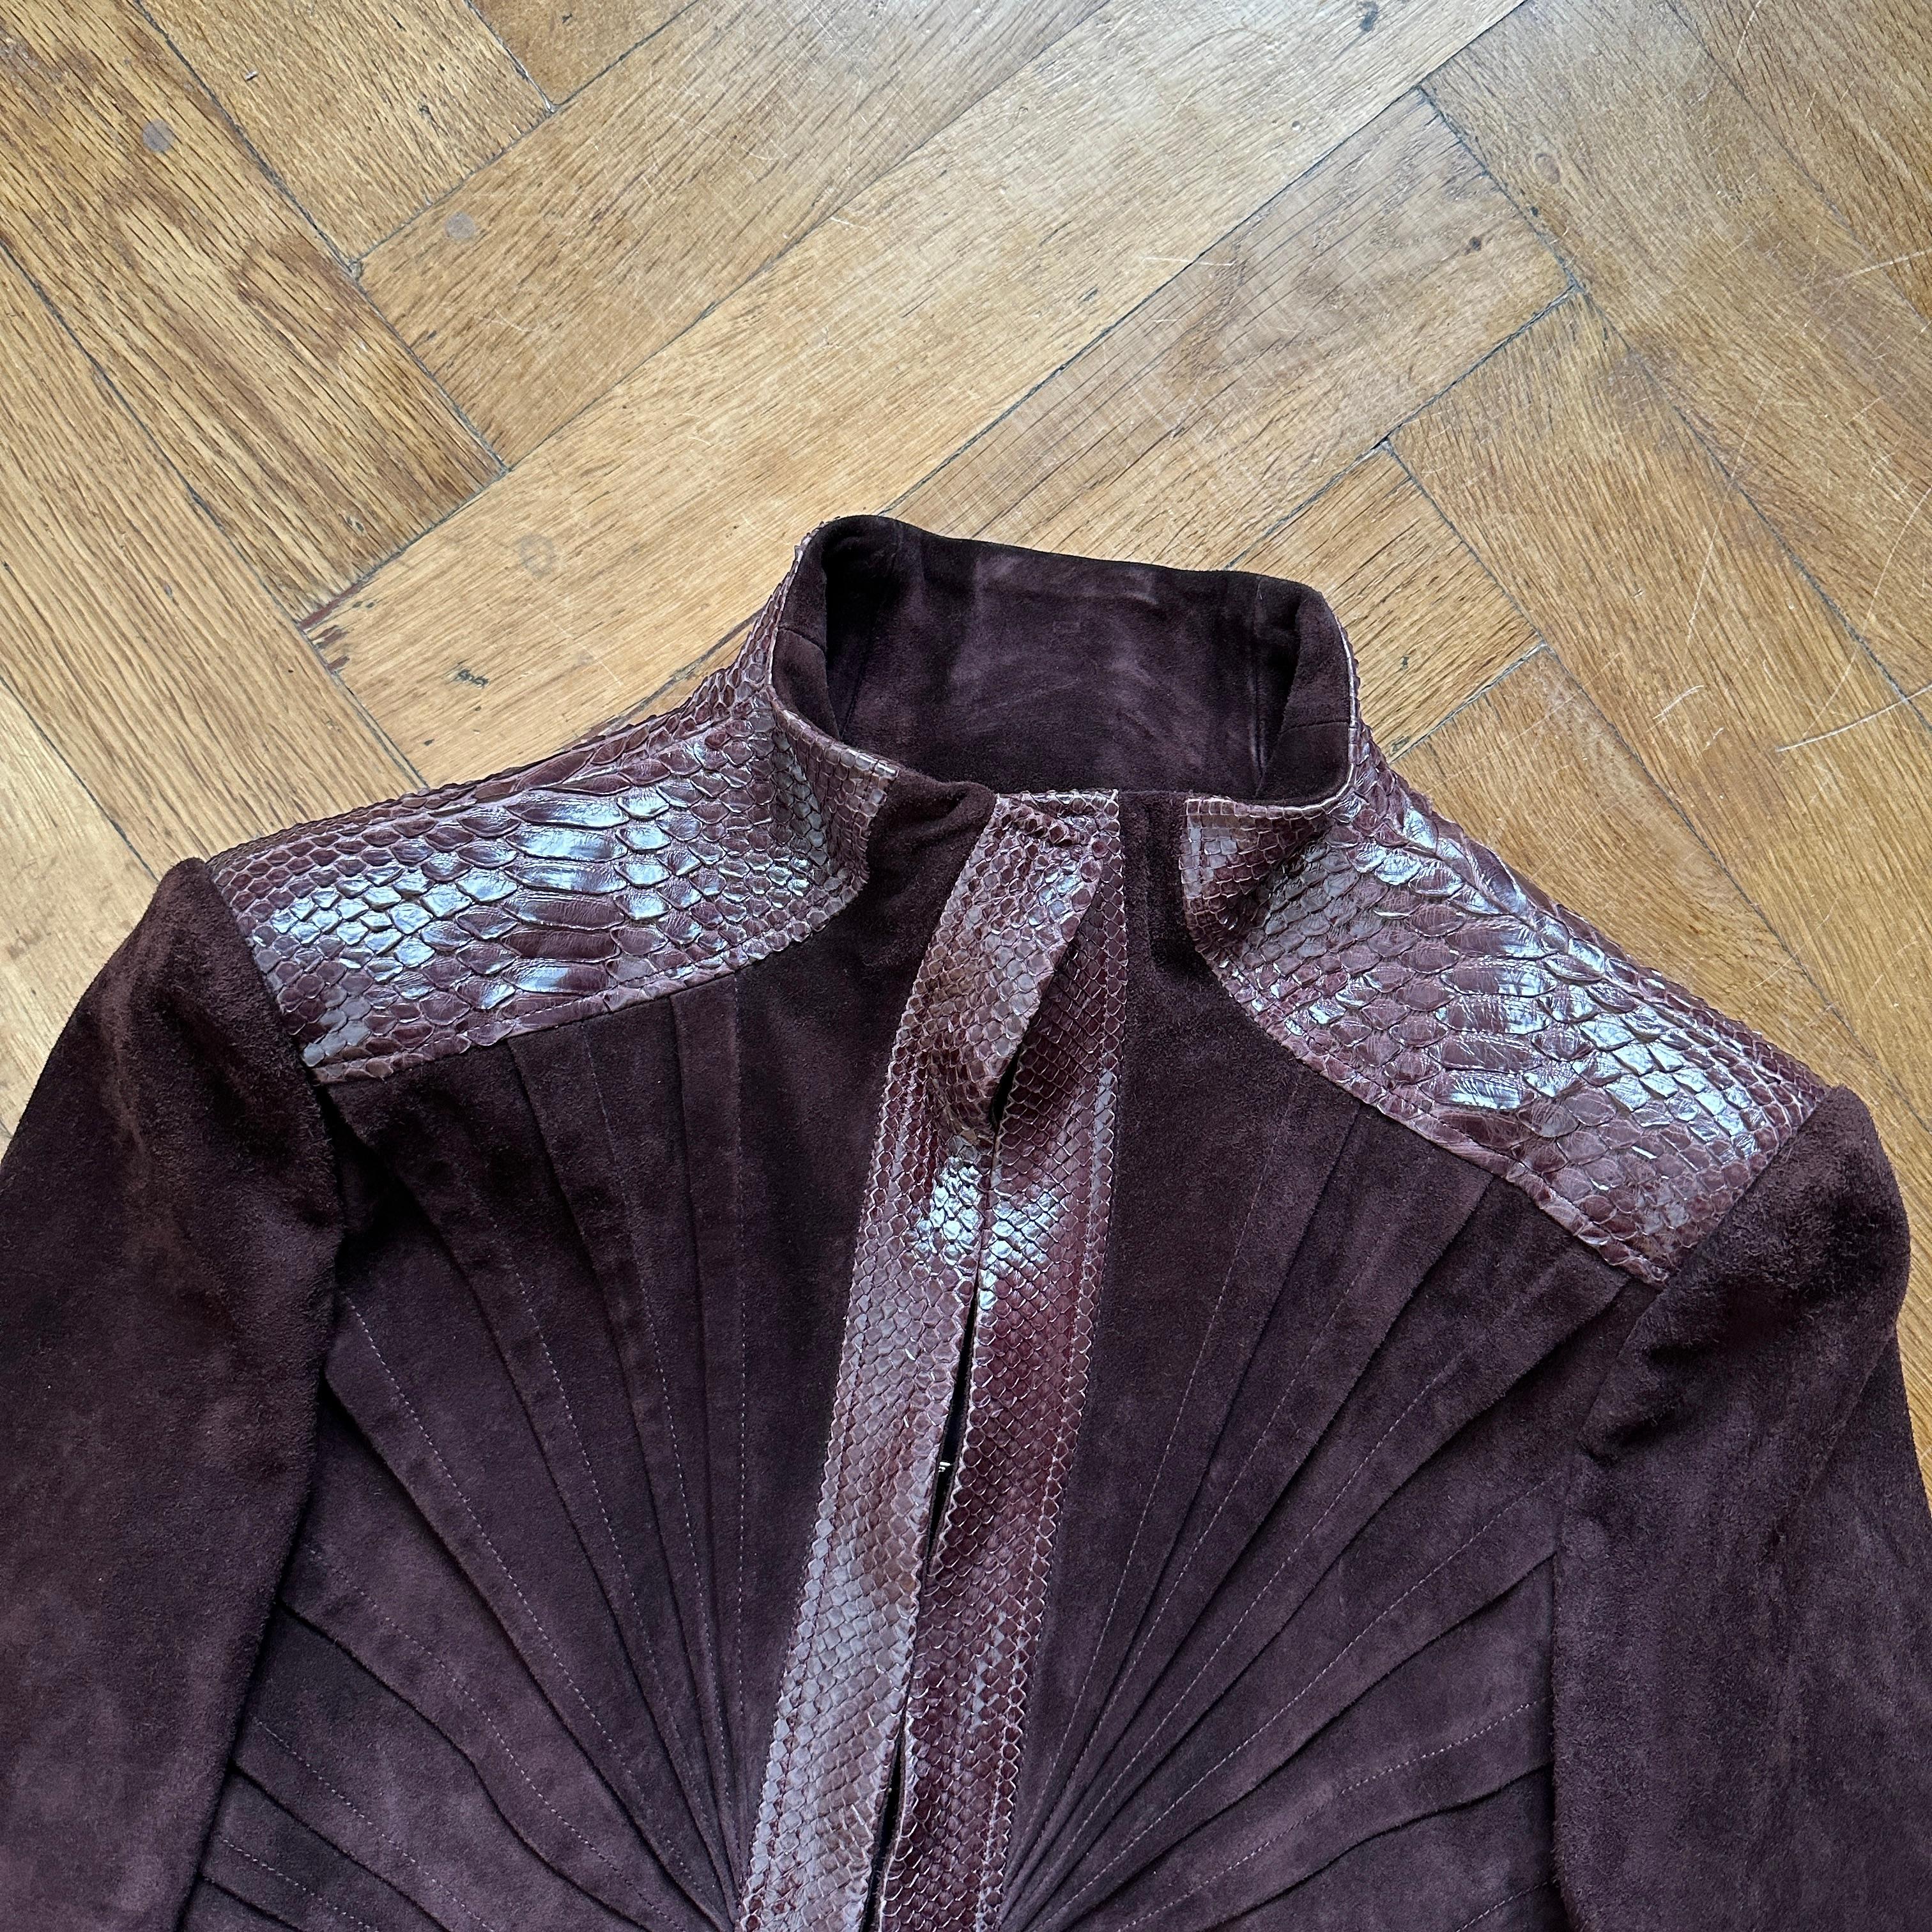 Women's Gucci Spring/Summer 2004 Python Suede Paneled Jacket by Tom Ford